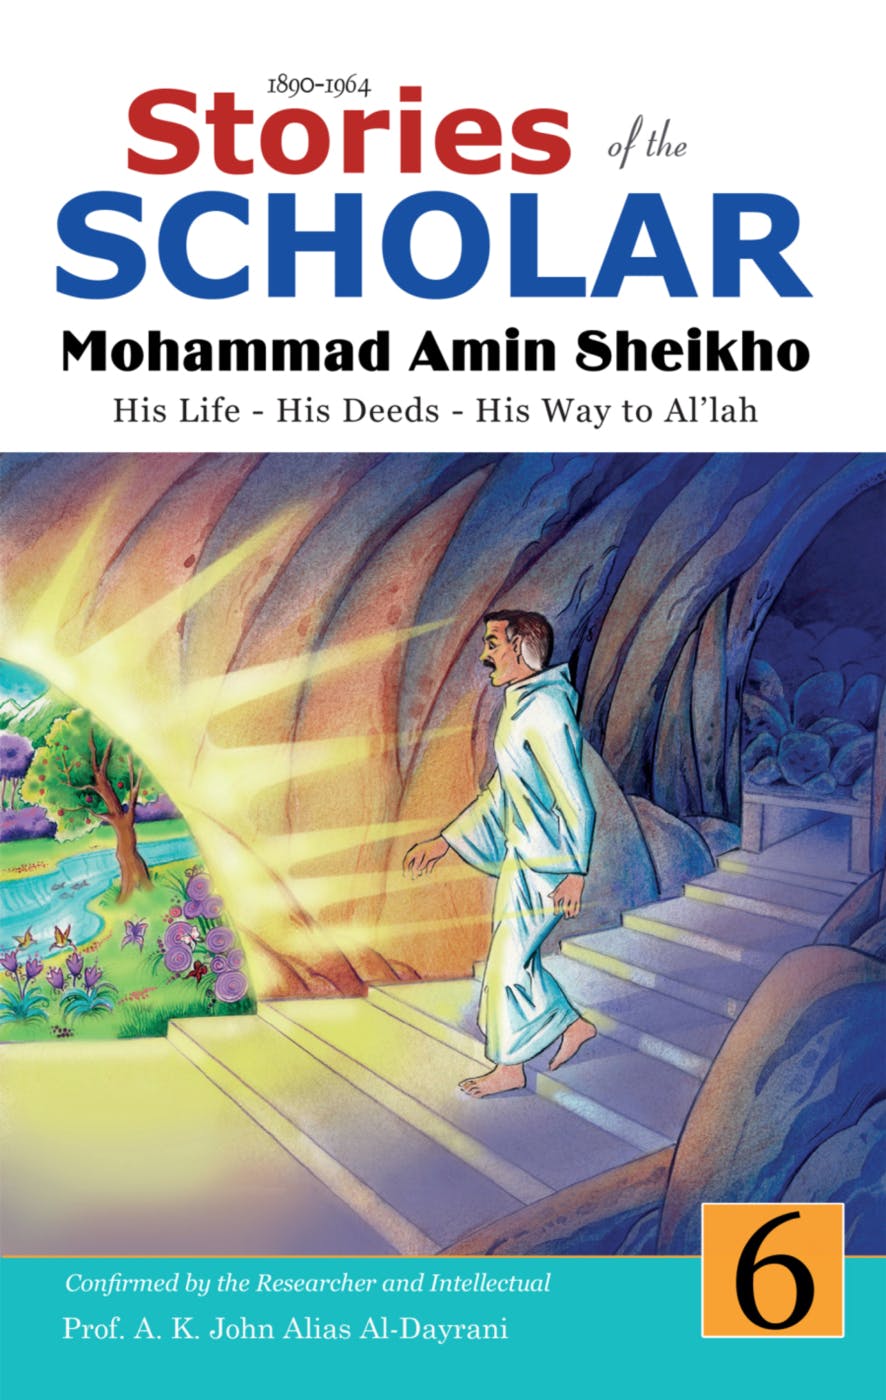 Stories of the Scholar Mohammad Amin Sheikho - Part Six: His Life, His Deeds, His Way to Al'lah - A. K. John Alias Al-Dayrani, Mohammad Amin Sheikho